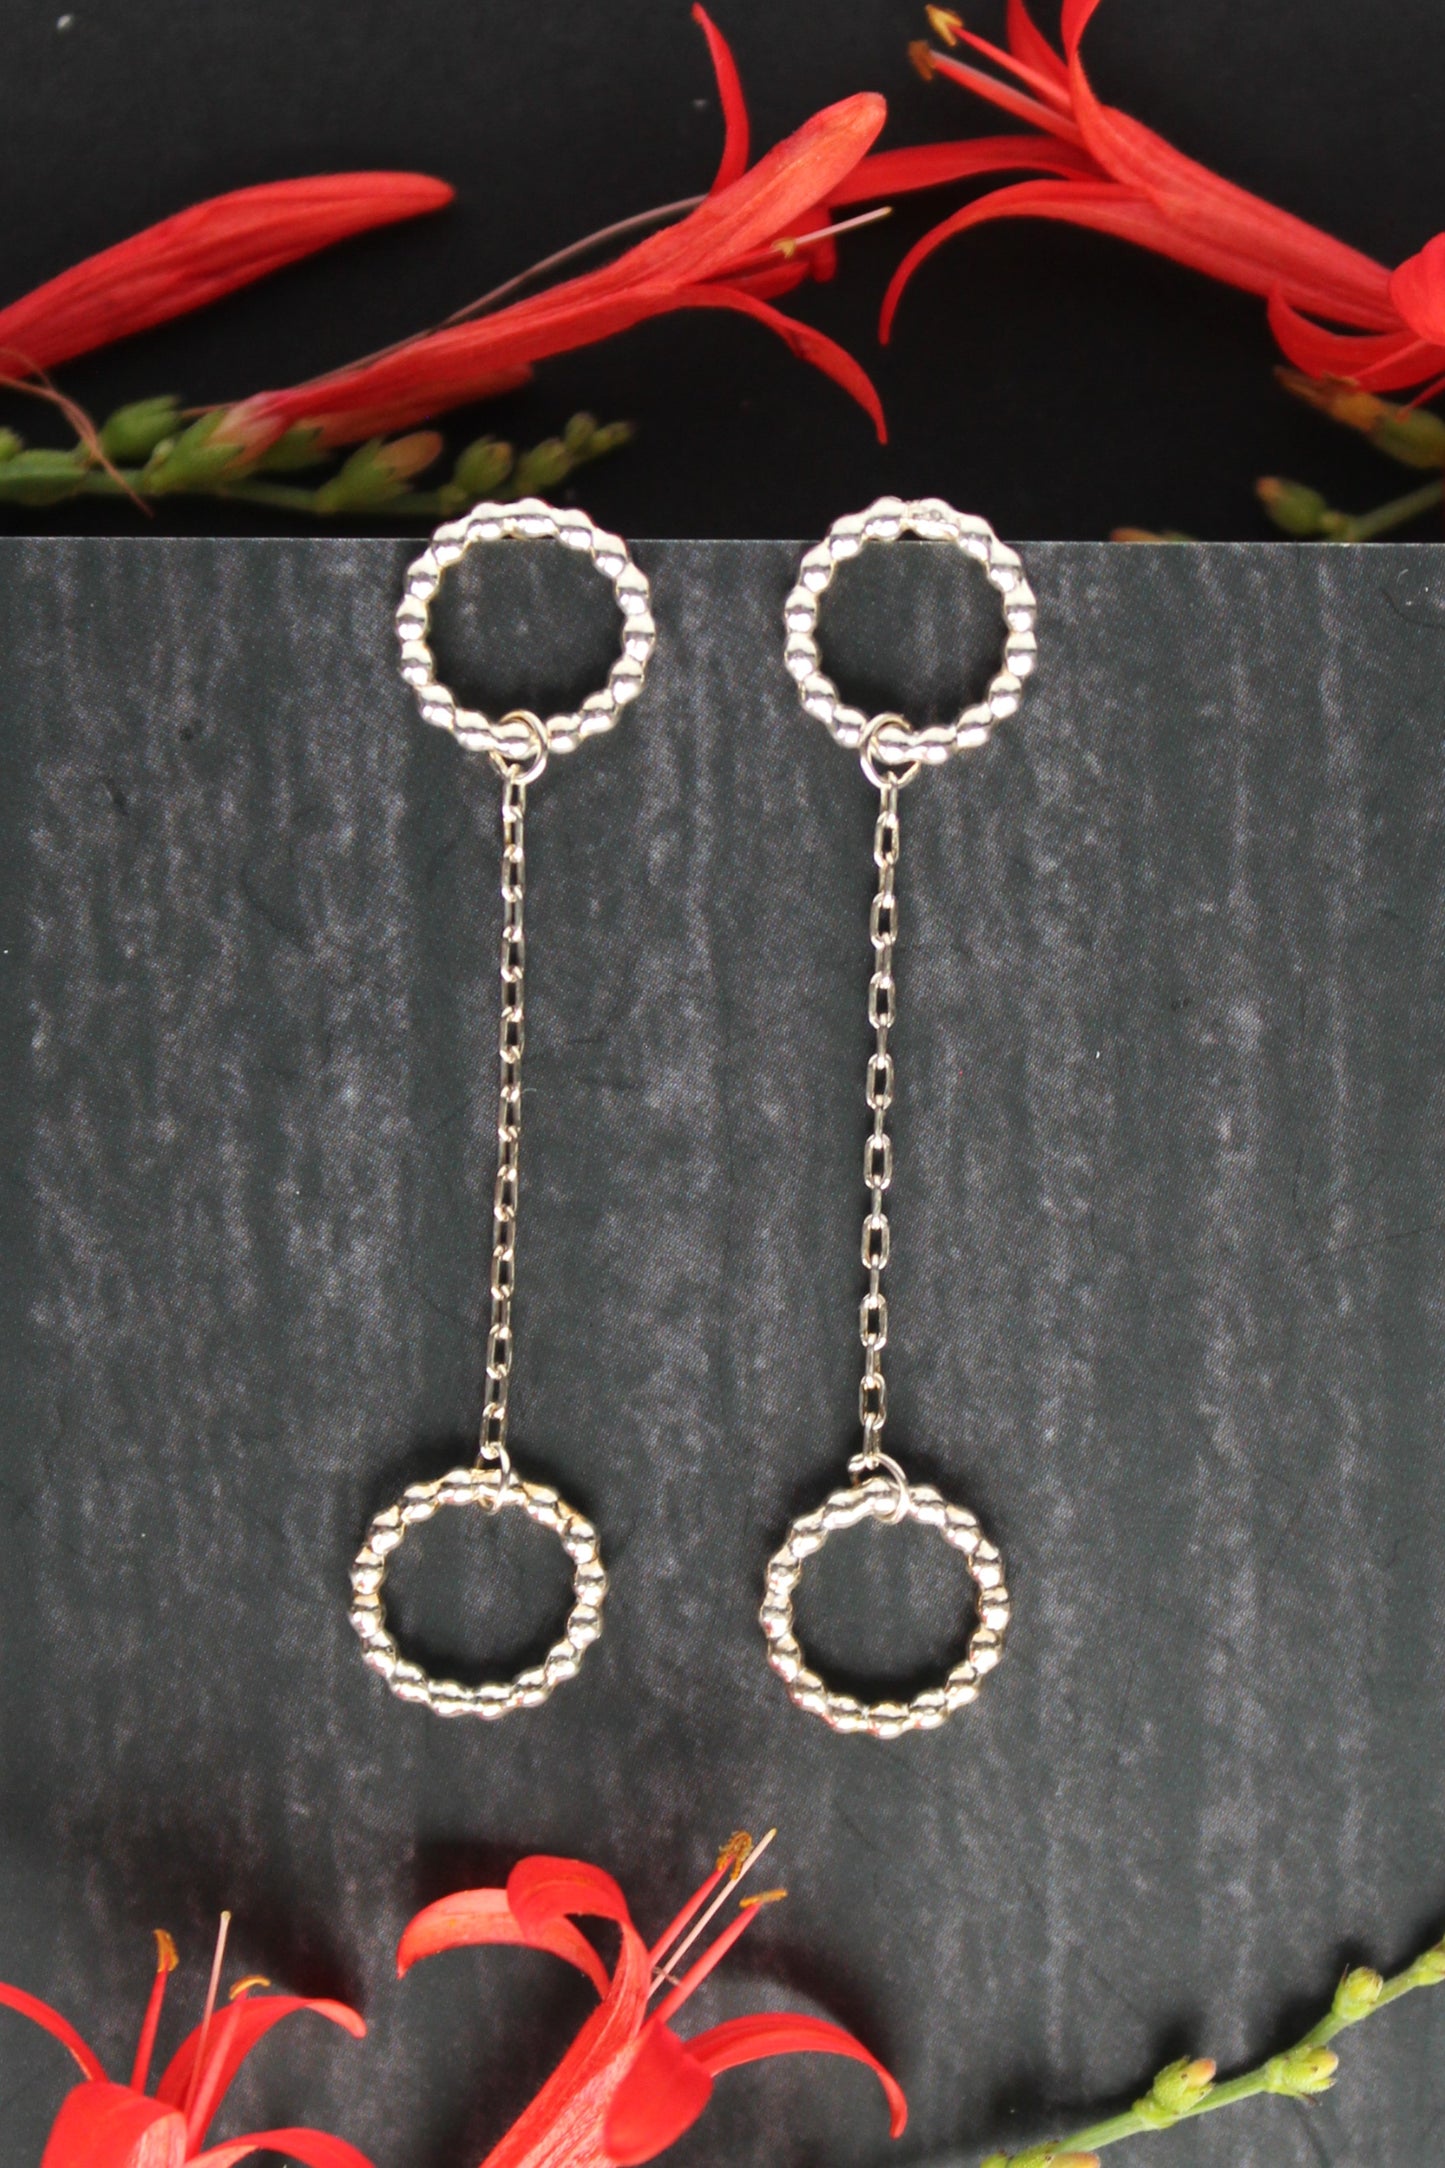 Chained Beaded Circle Sterling Silver Dangle Everyday Earrings. Handmade by Cara Carter Jewelry